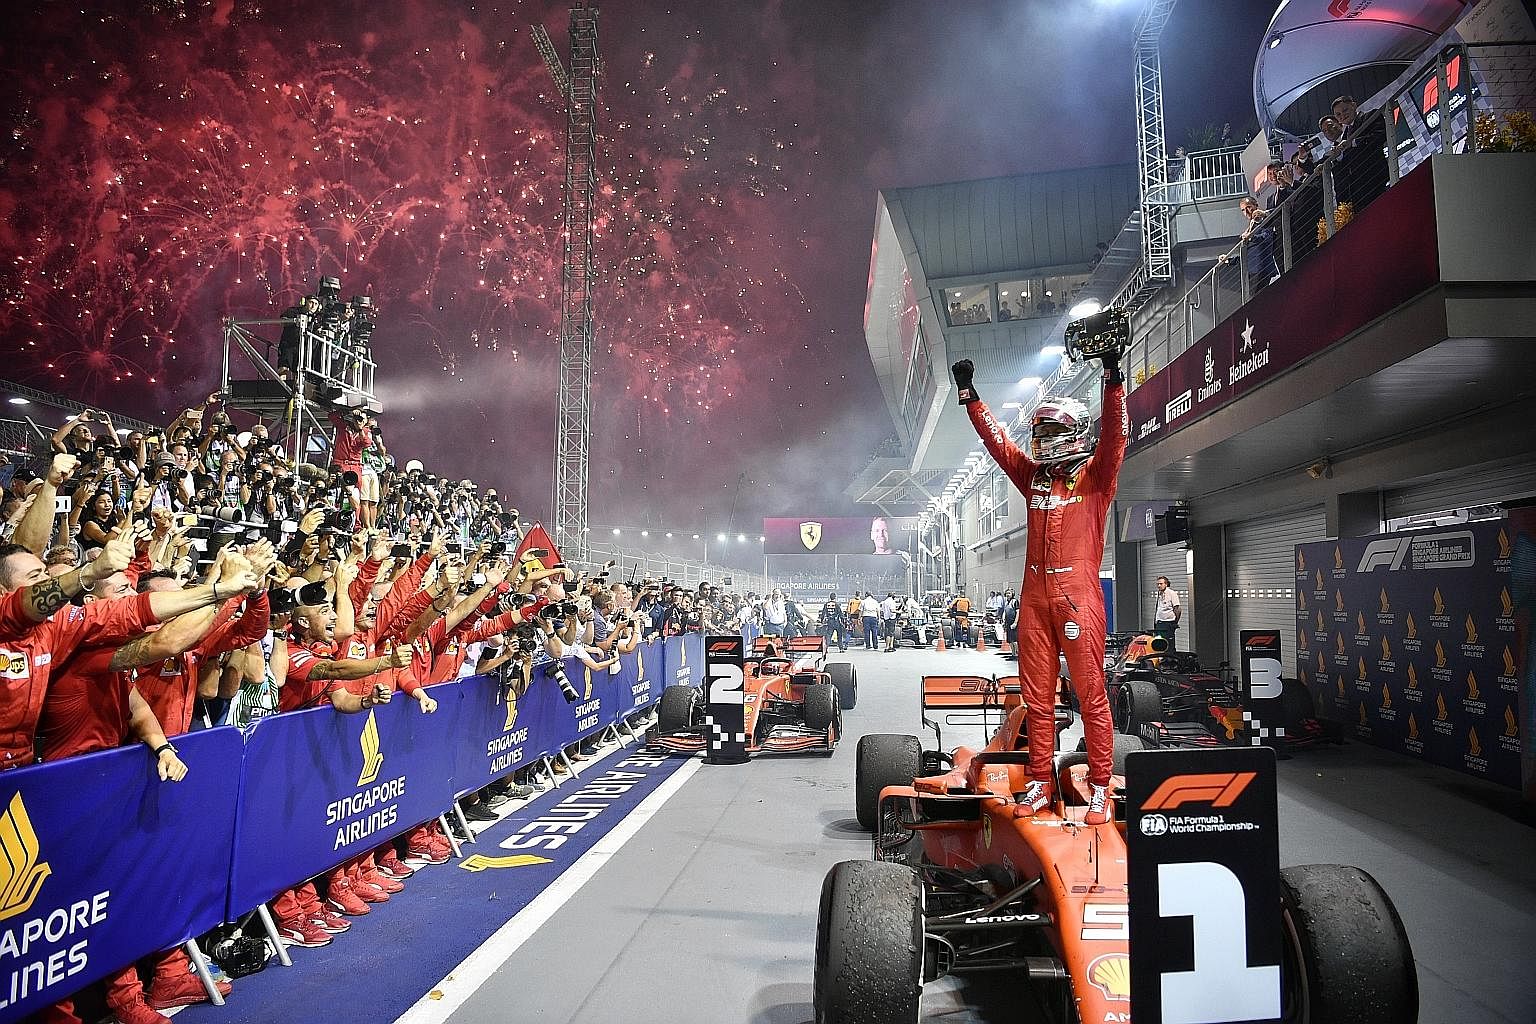 Ferrari's Sebastian Vettel celebrates after winning a record fifth title at the Singapore Airlines Singapore Grand Prix last night. The German four-time world champion started the 61-lap race in third place, before clinching top spot for his first ra